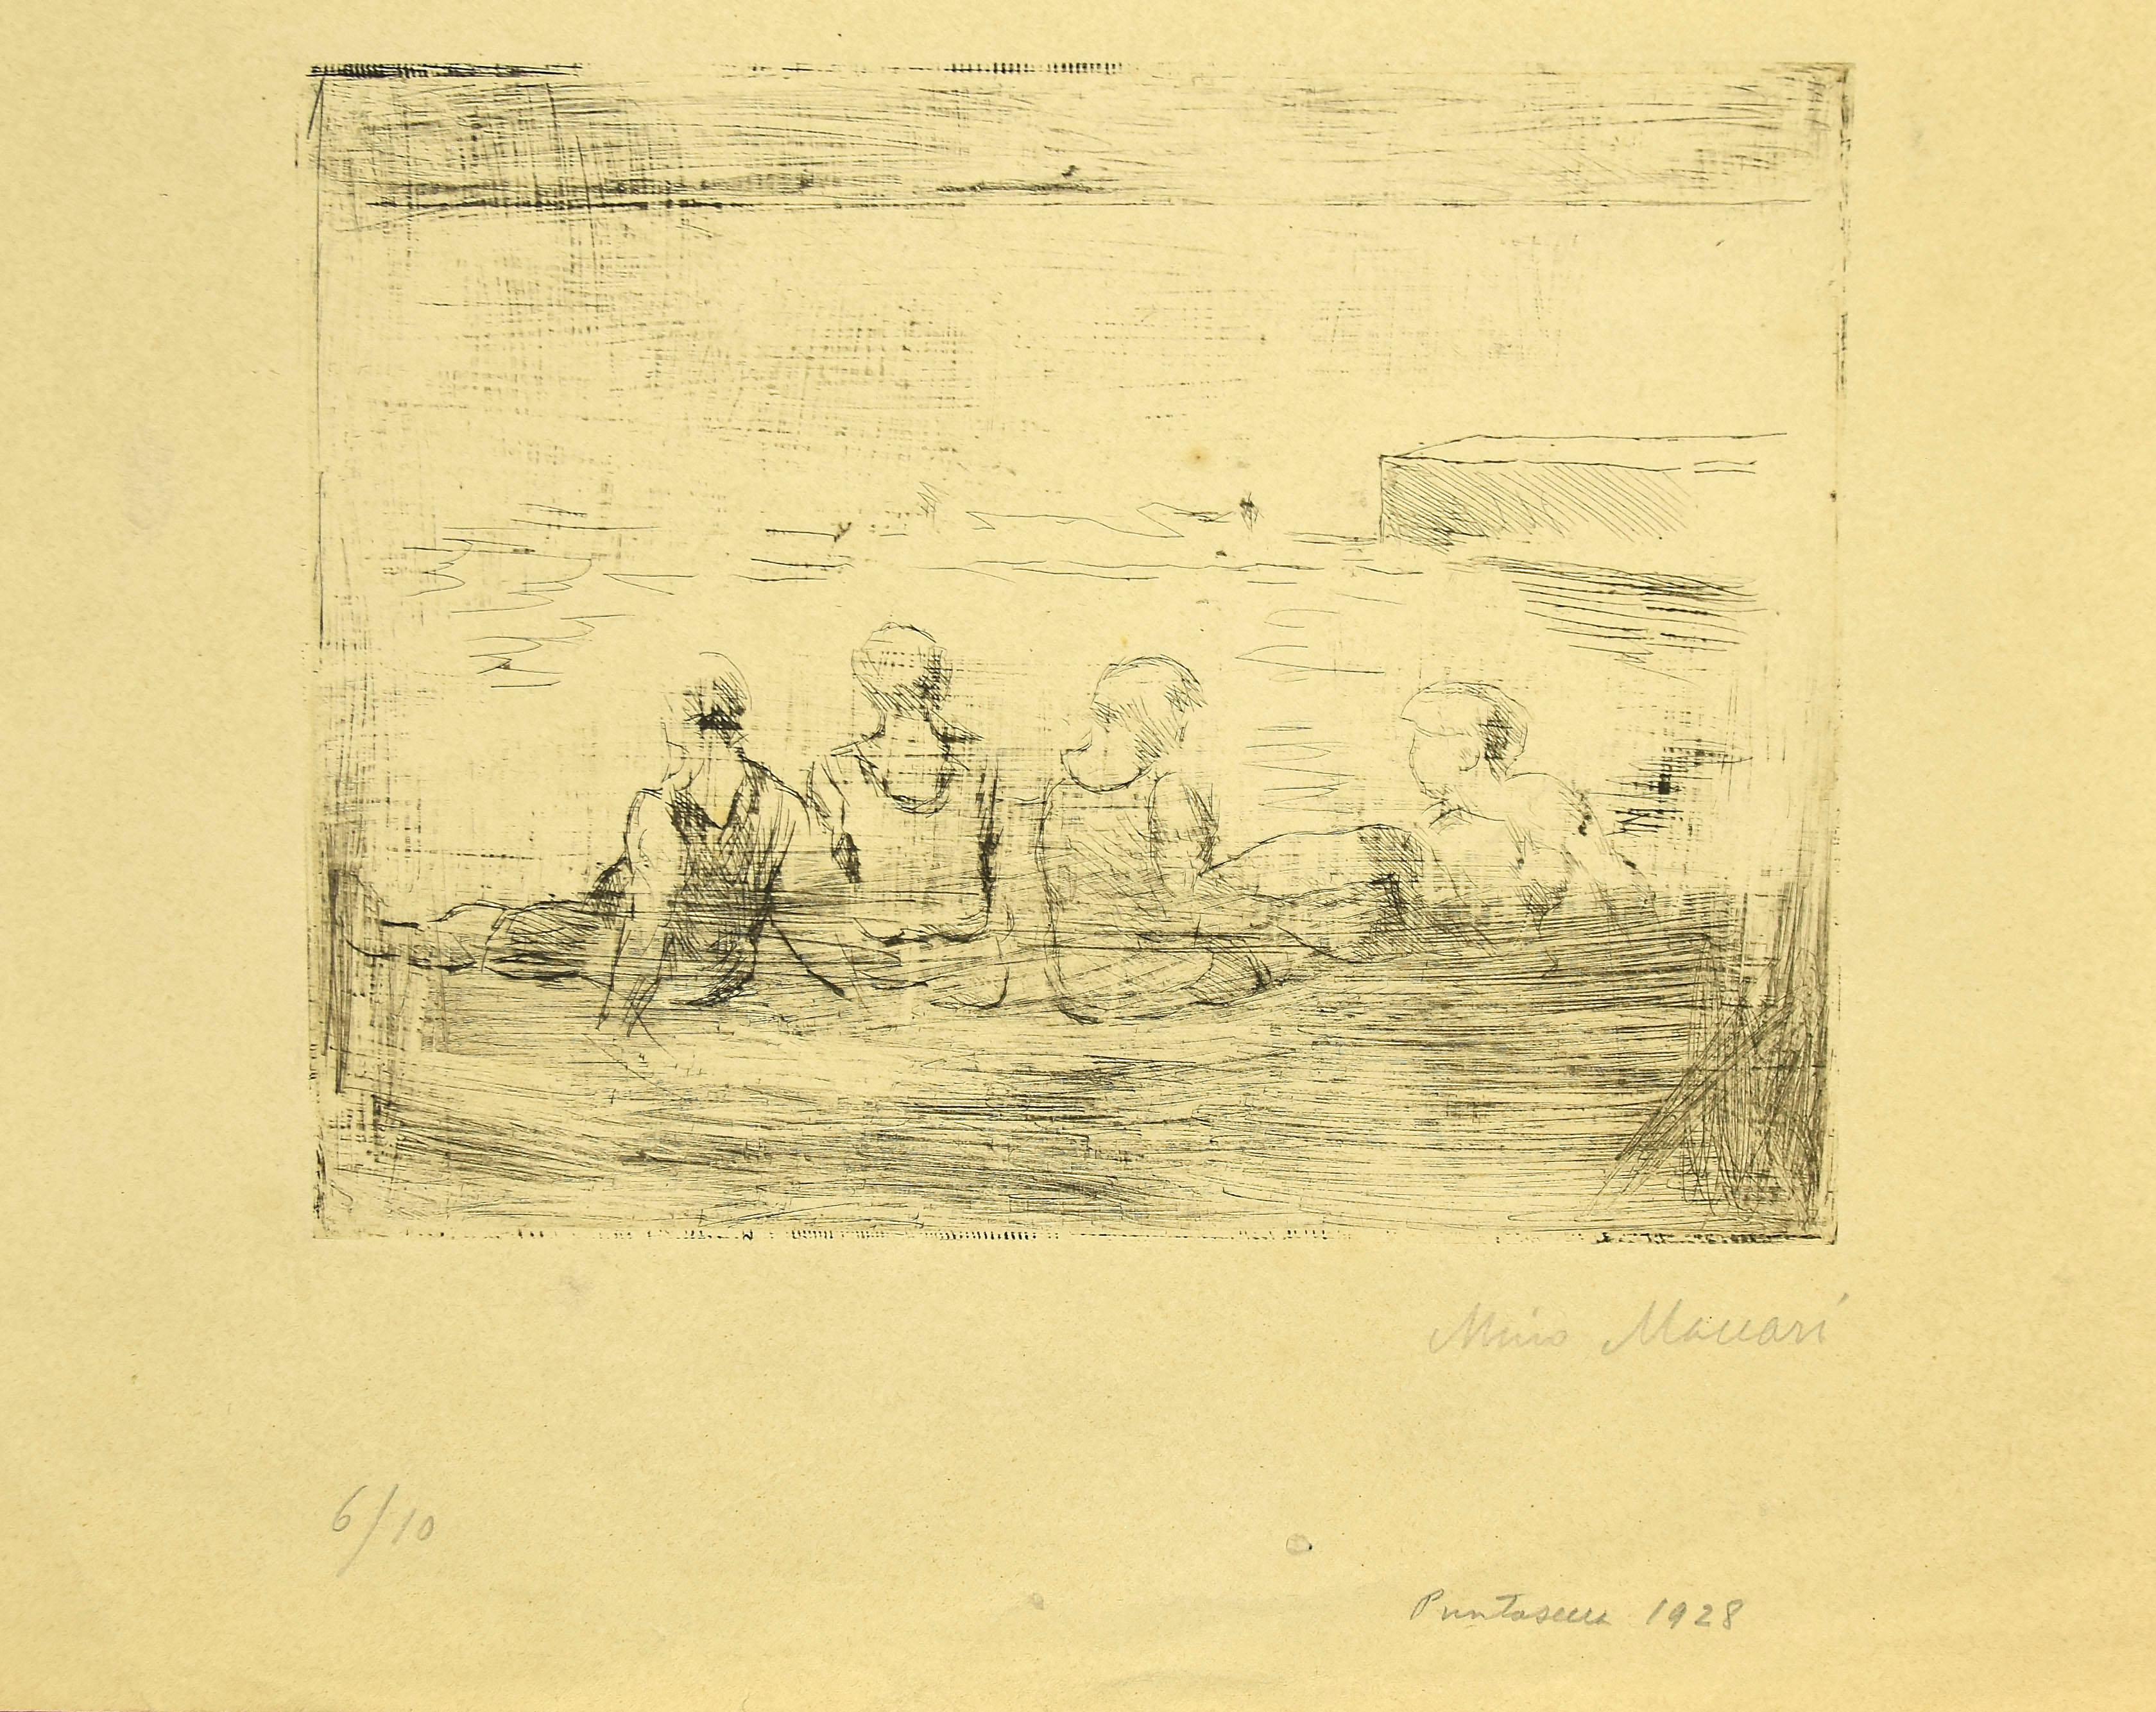 Figures is an original modern artwork realized in 1928 by the Italian artist Mino Maccari (Siena, 1898 - Rome, 1989).

Original drypoint on paper. Edition of 10 prints.

Hand-signed in pencil by the artist on the lower right corner: Mino Maccari.